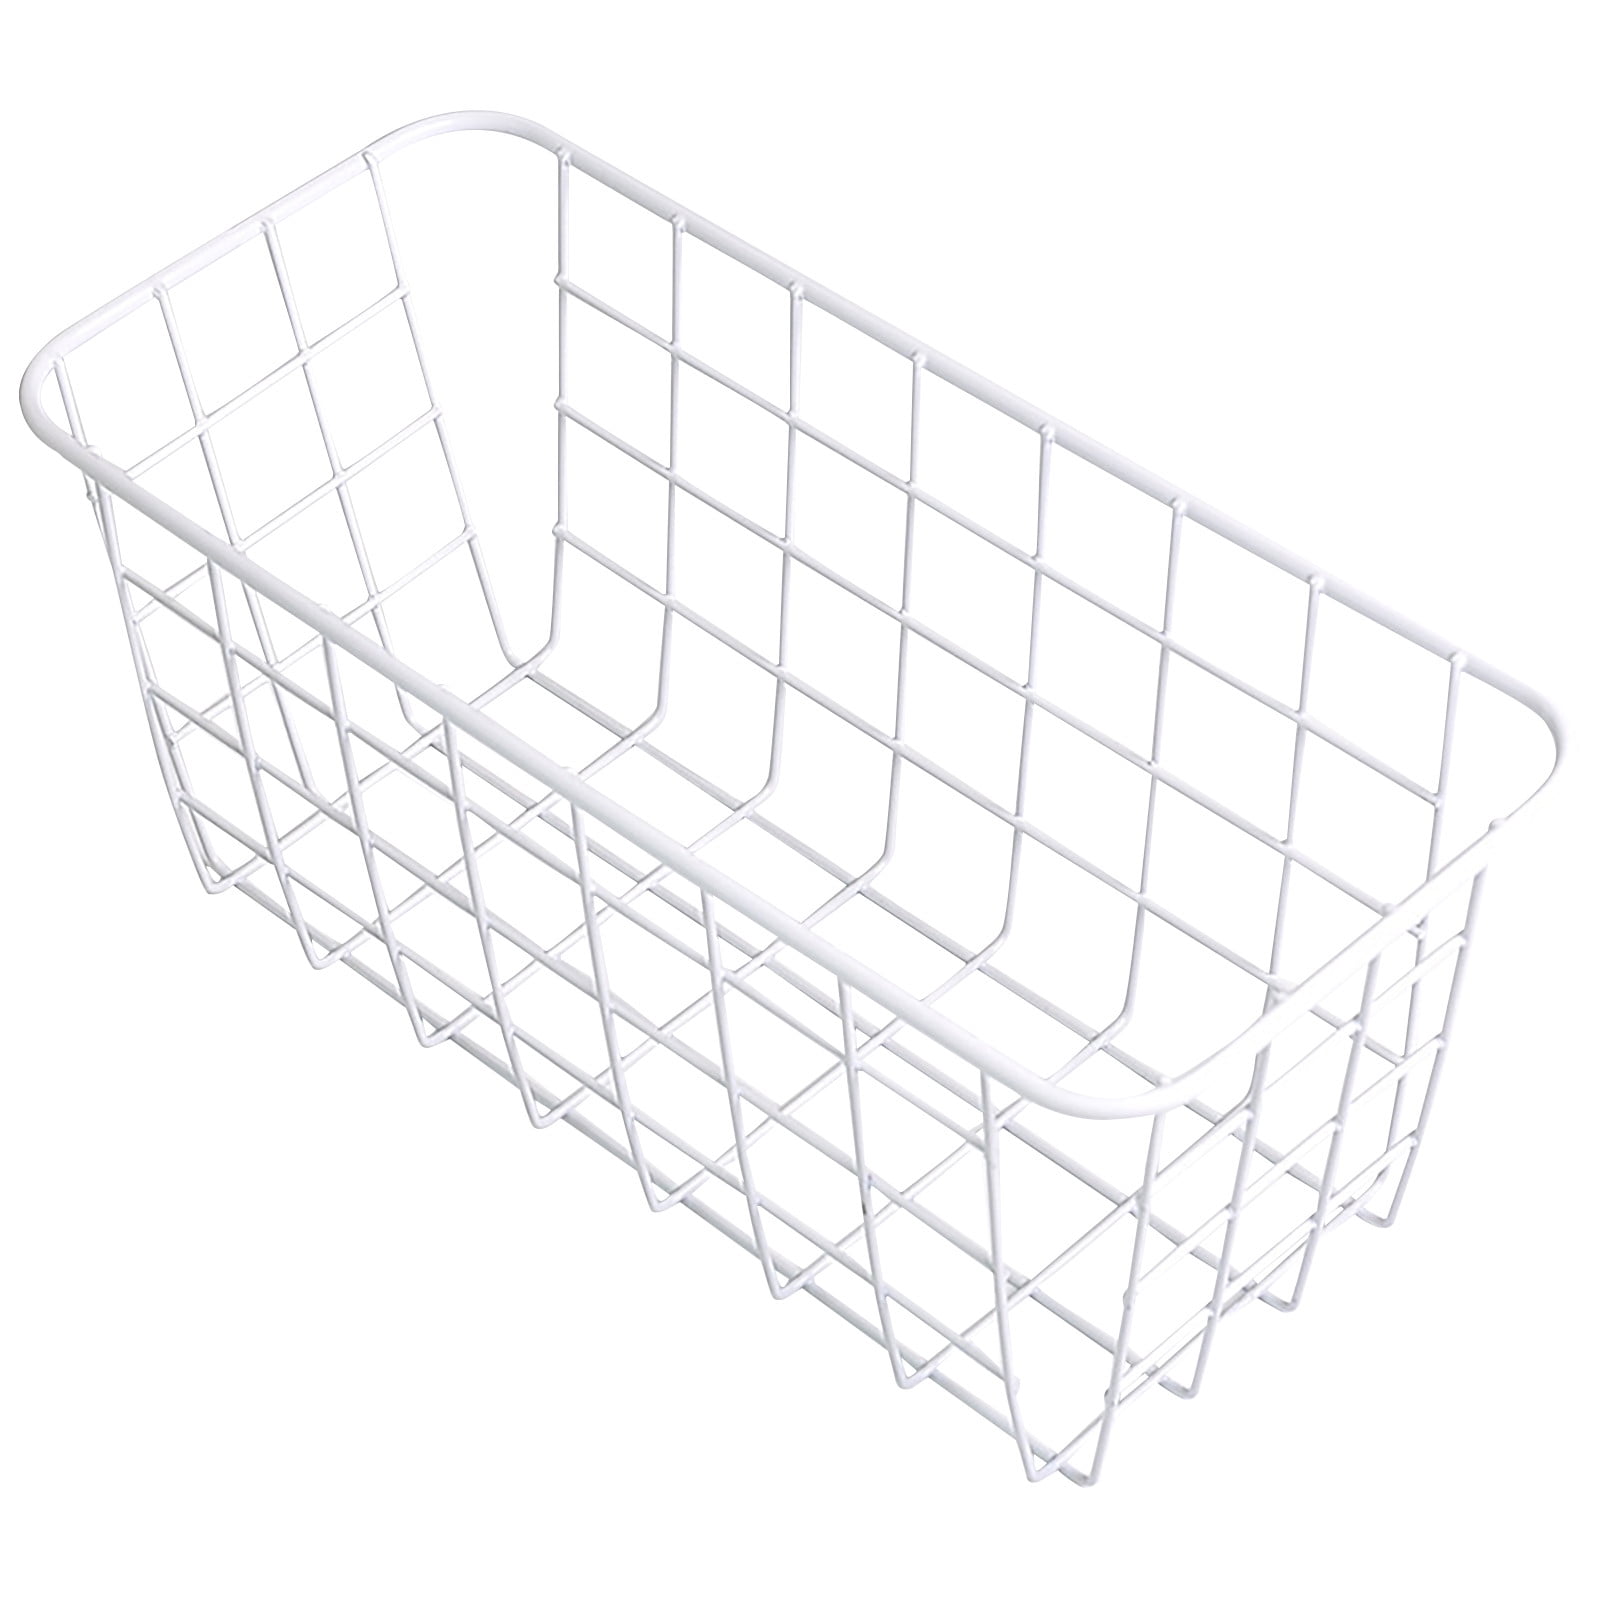 Details about   Rubbermaid Storage Shed Wire Basket Accessory/Tool Organizer Open Box 4 Pack 